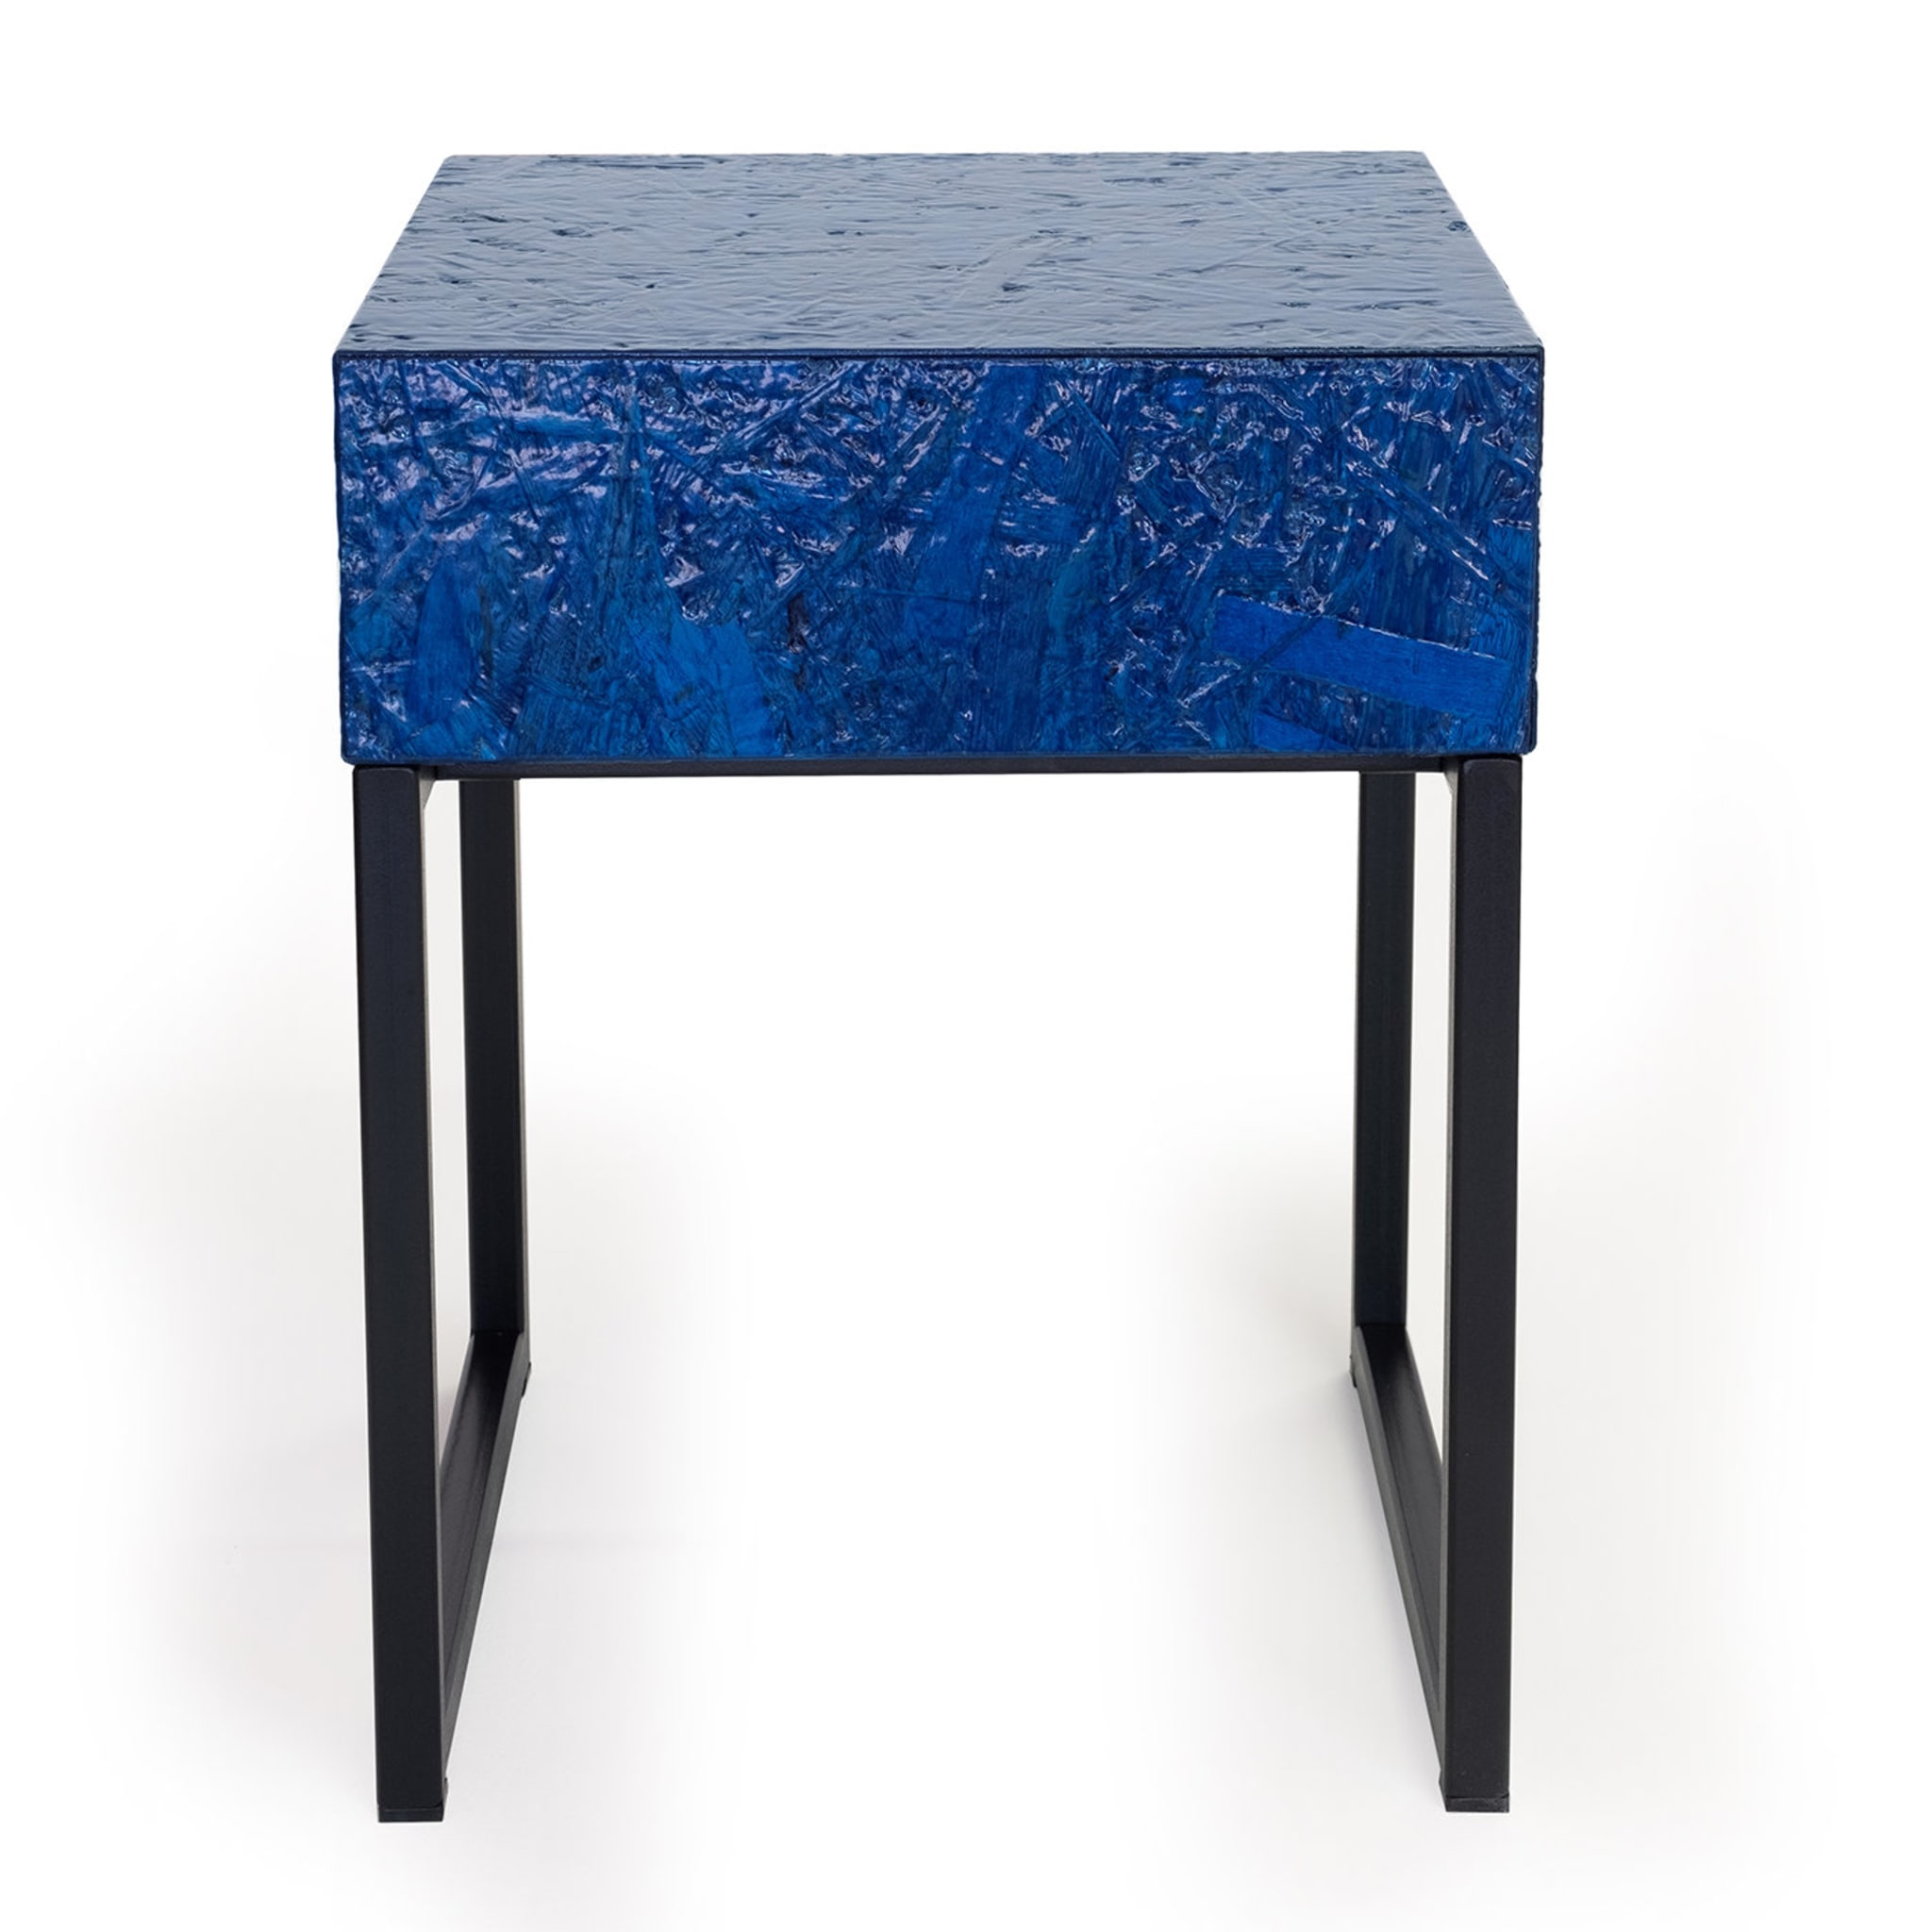 Spring Bedside Table With Drawer Blue by Fabrizio Contaldo  - Alternative view 5